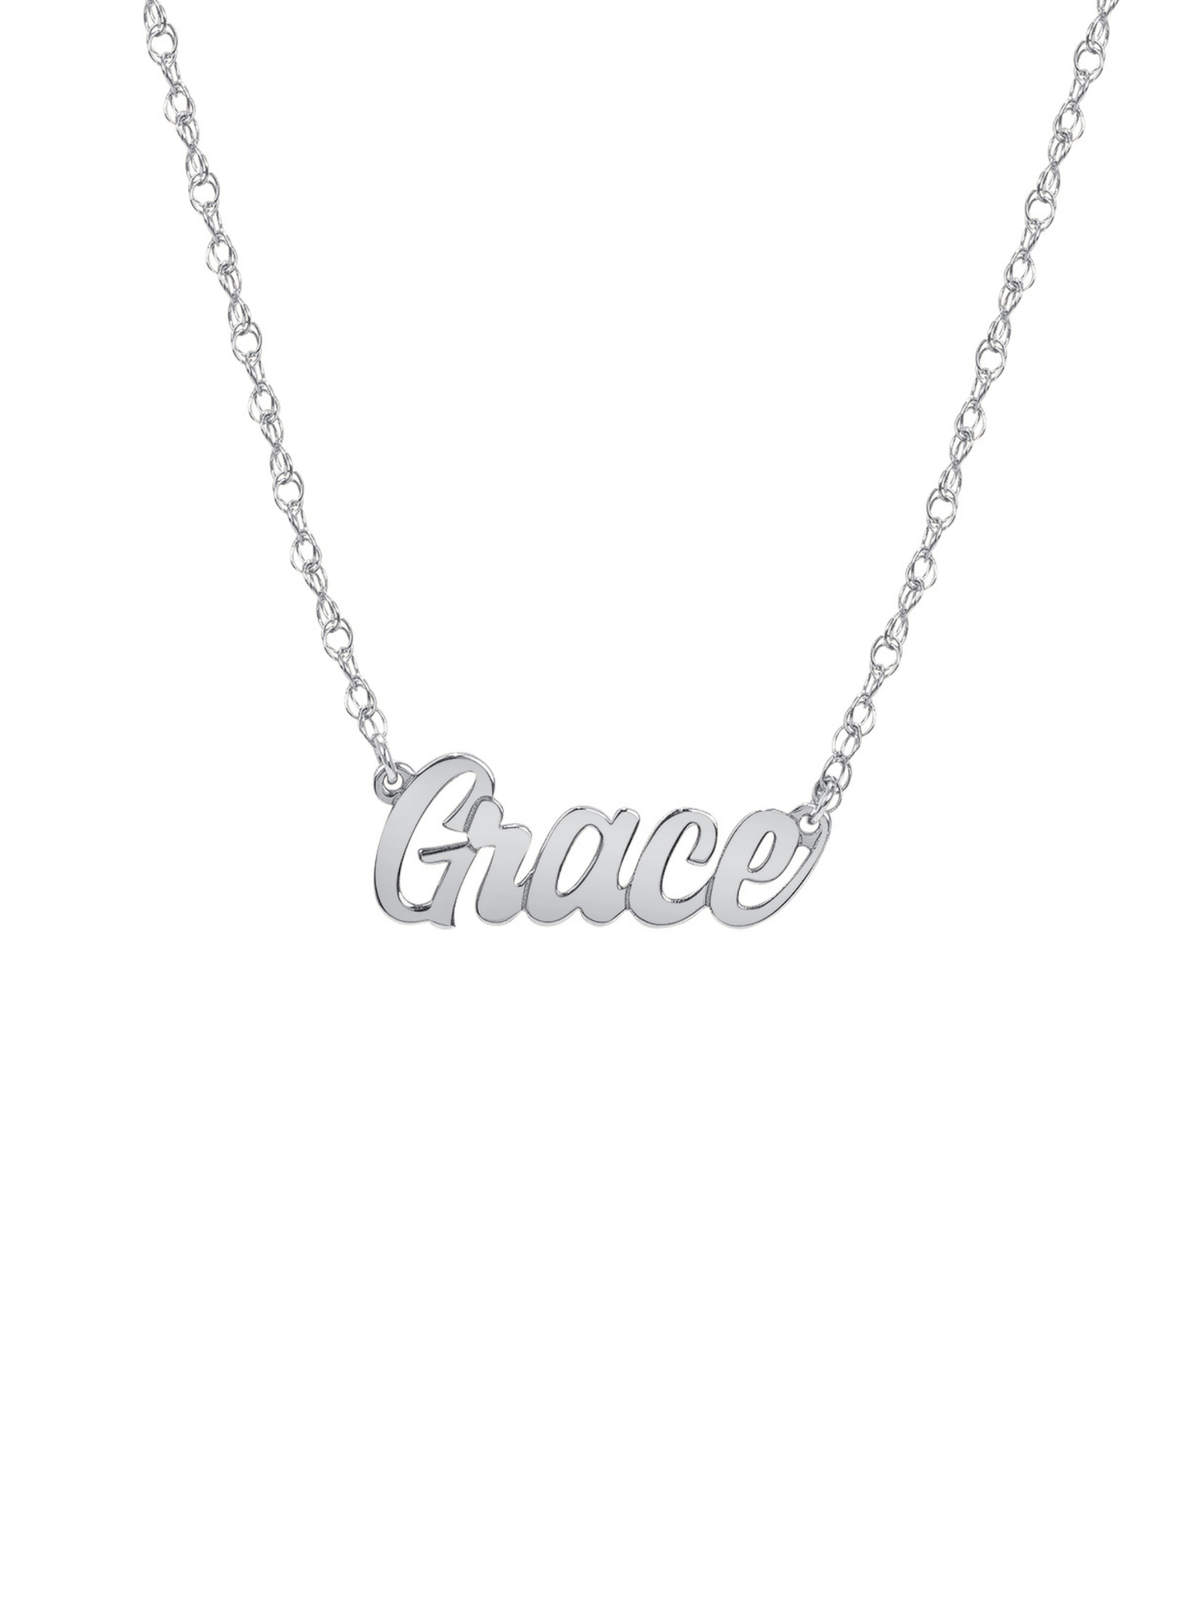 White gold necklace with kids name on white background